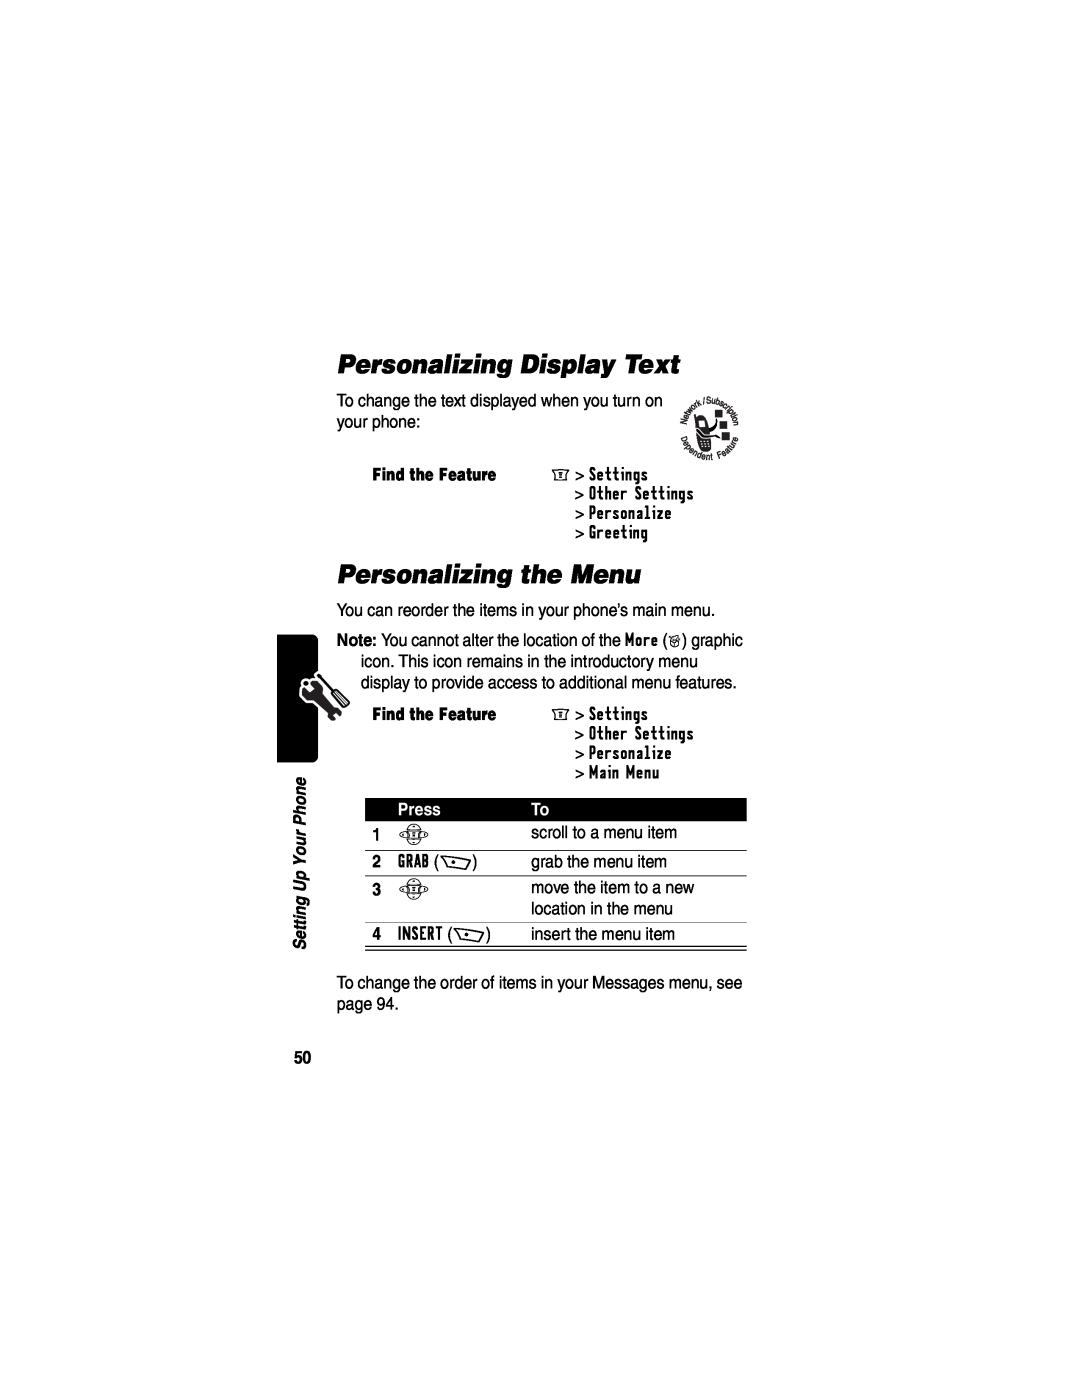 Motorola WIRELESS TELEPHONE manual Personalizing Display Text, Personalizing the Menu, Find the Feature, Press 